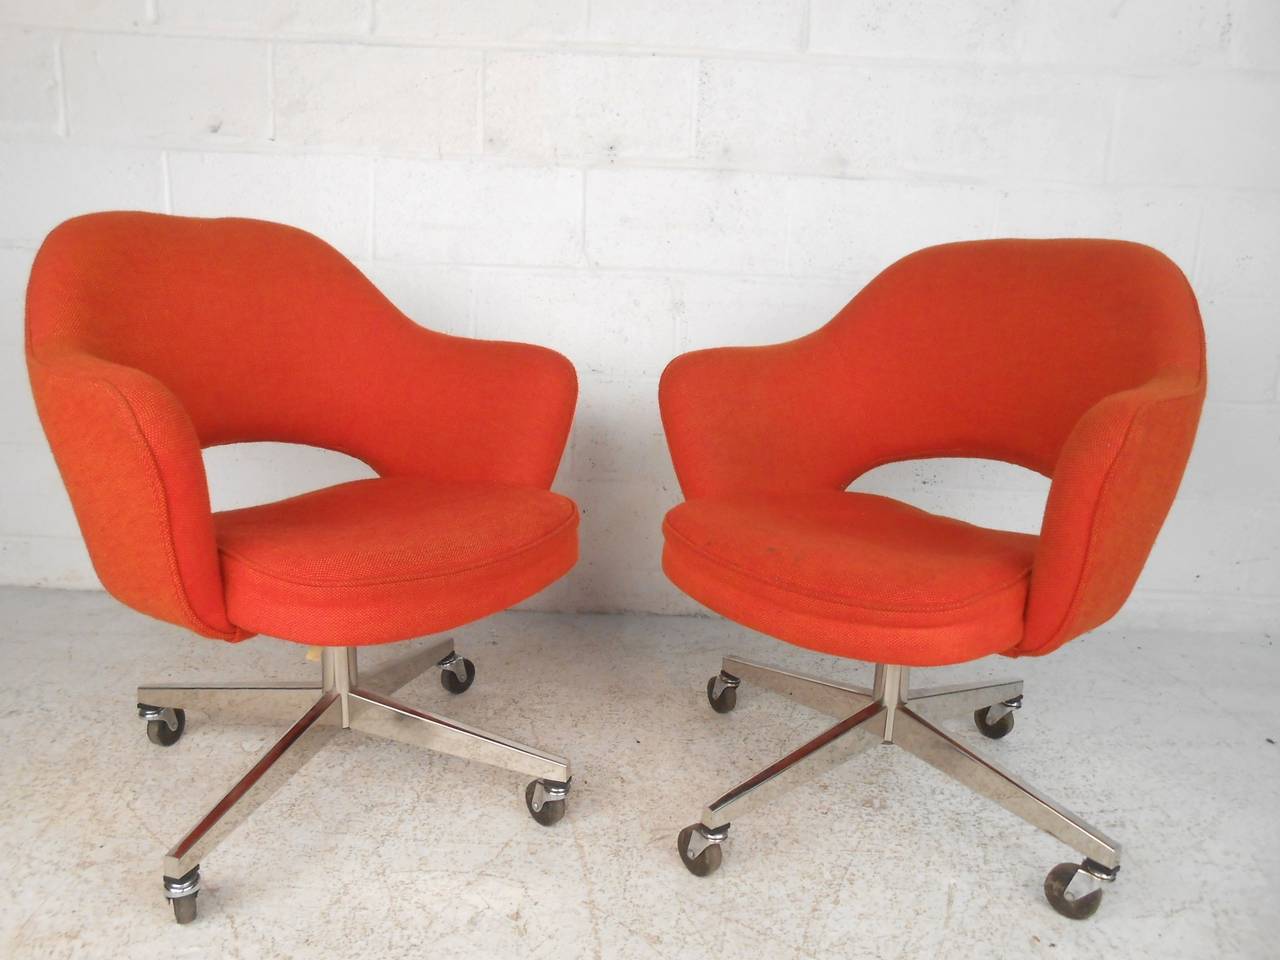 Famous 1960s style chairs made by the leader of the Mid-Century Modern movement; Knoll. Designed by Eero Saarinen, they feature the Classic open curvilinear back, formed arms, set on rolling casters.

(Please confirm item location - NY or NJ -